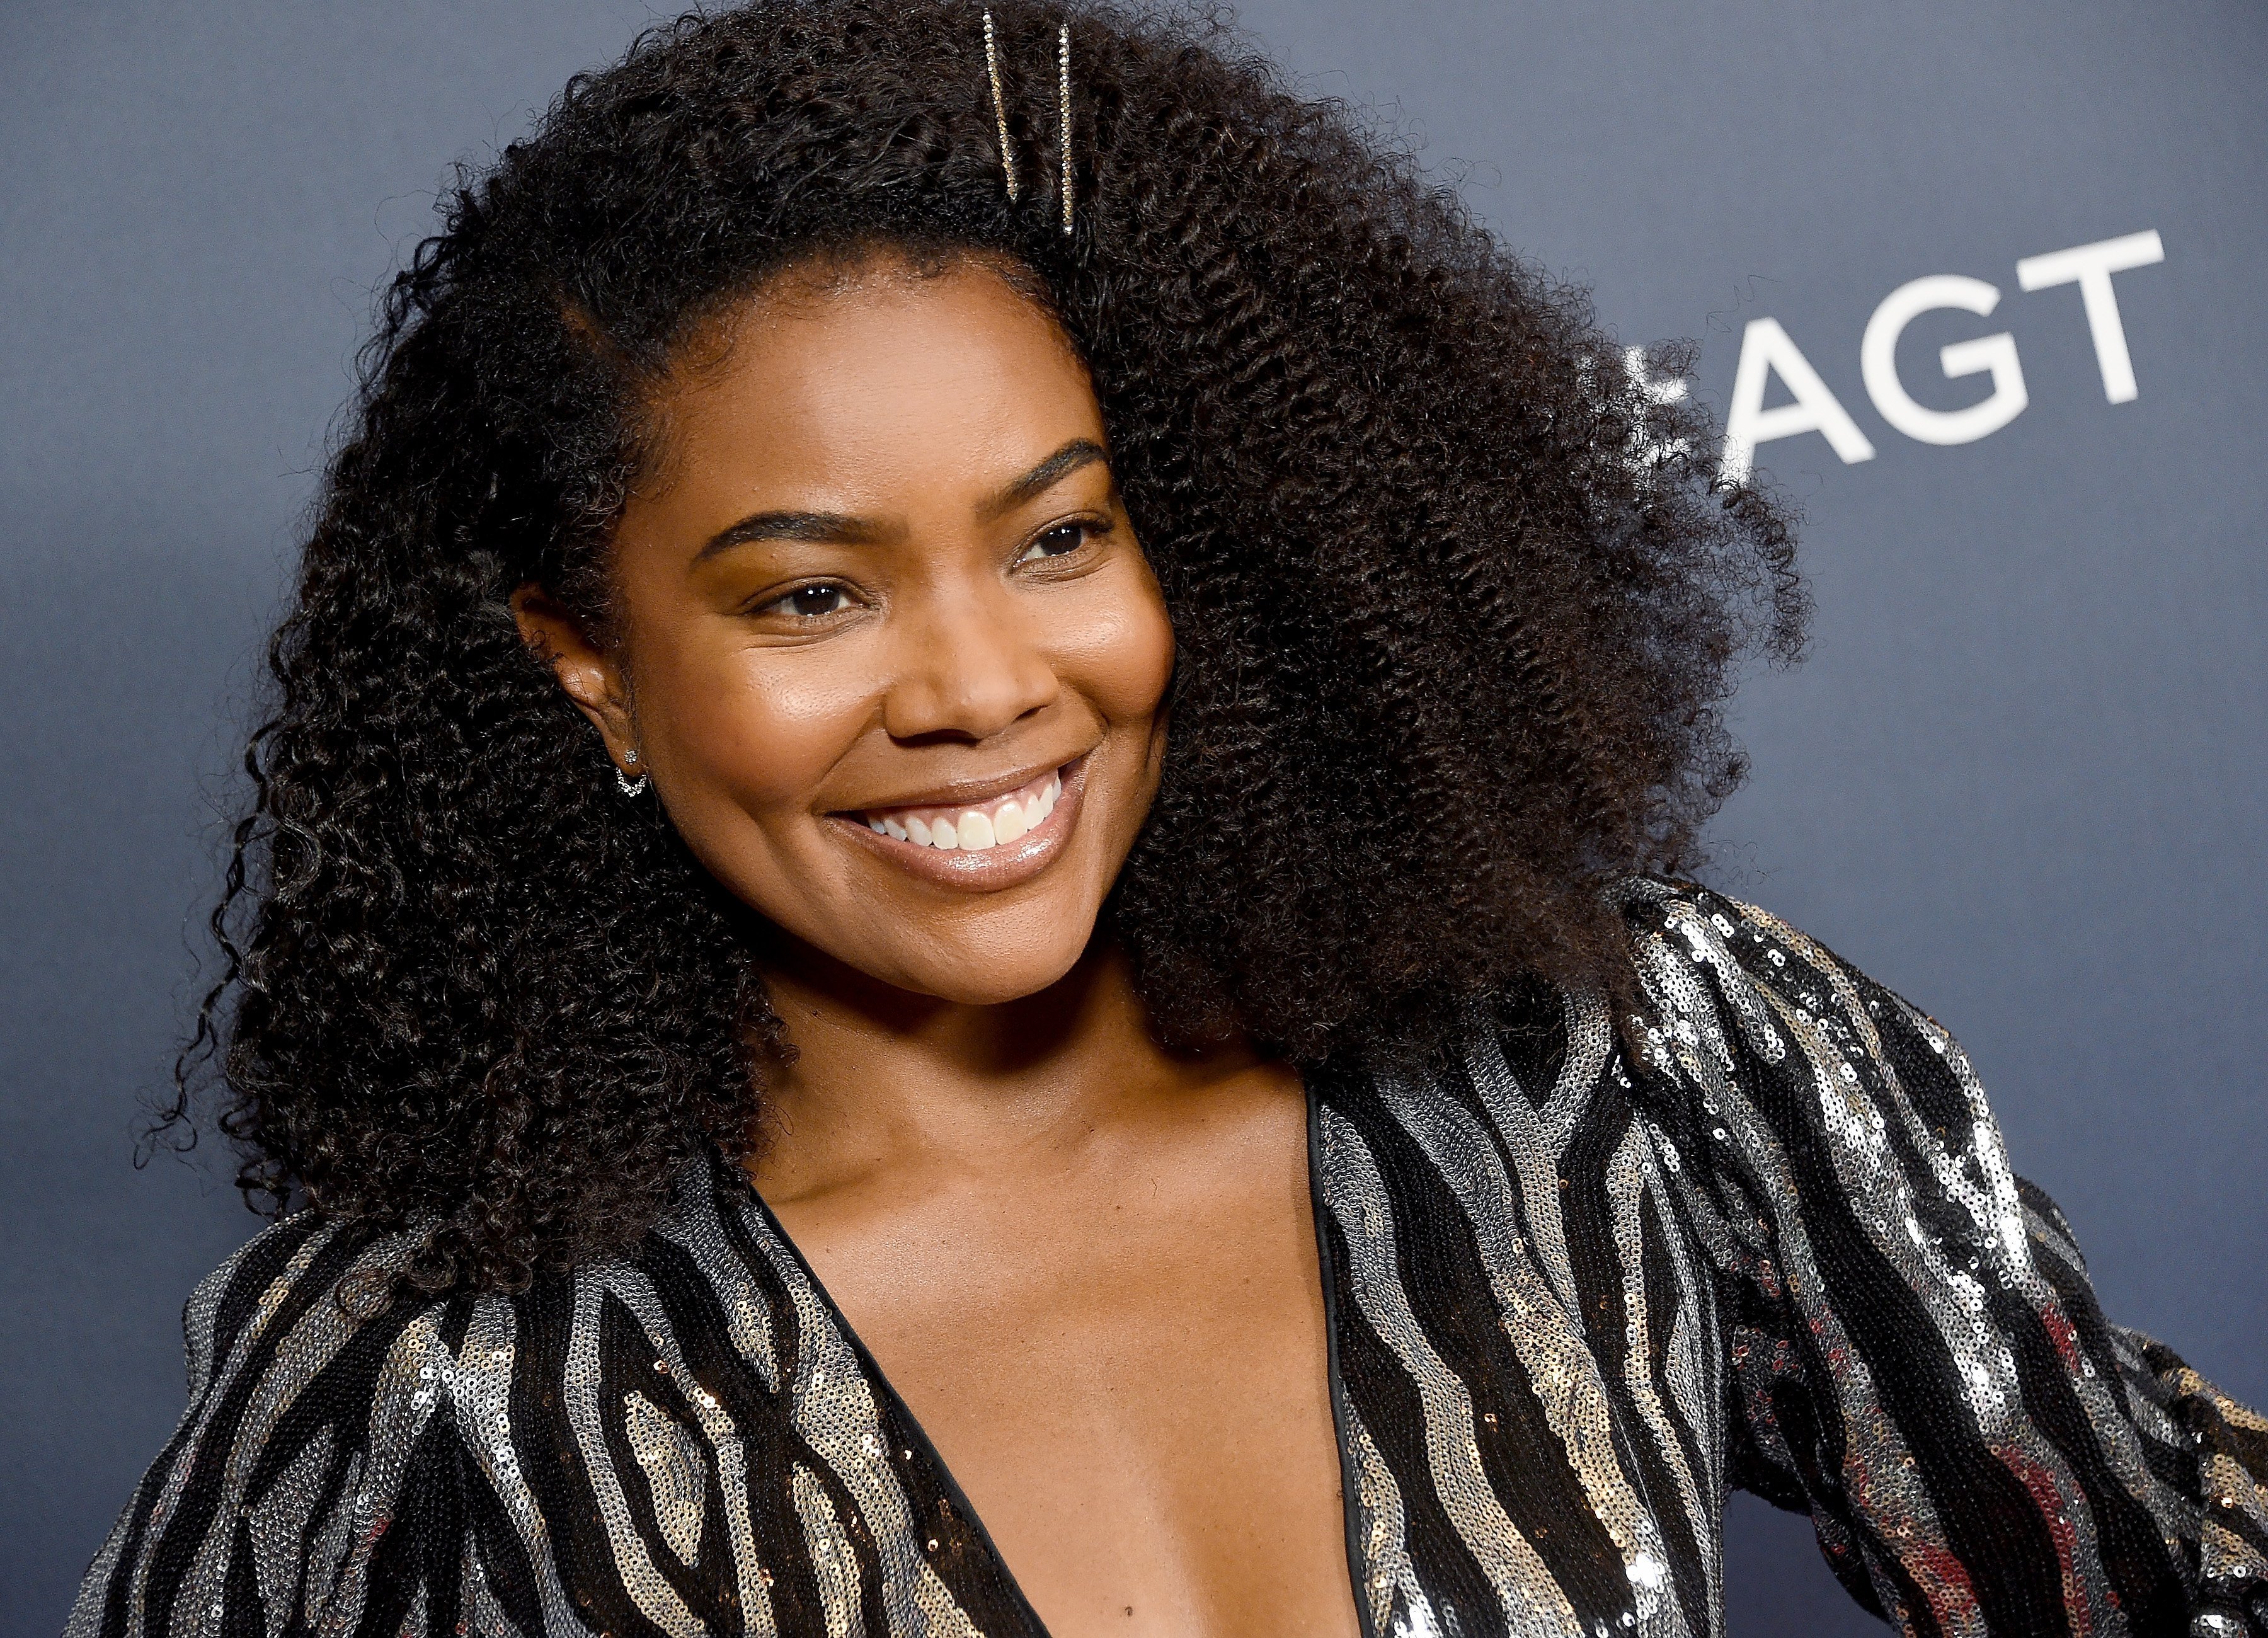 Gabrielle Union at the red carpet for the live show of "America's Got Talent" on September 10, 2019. | Photo: Getty Images